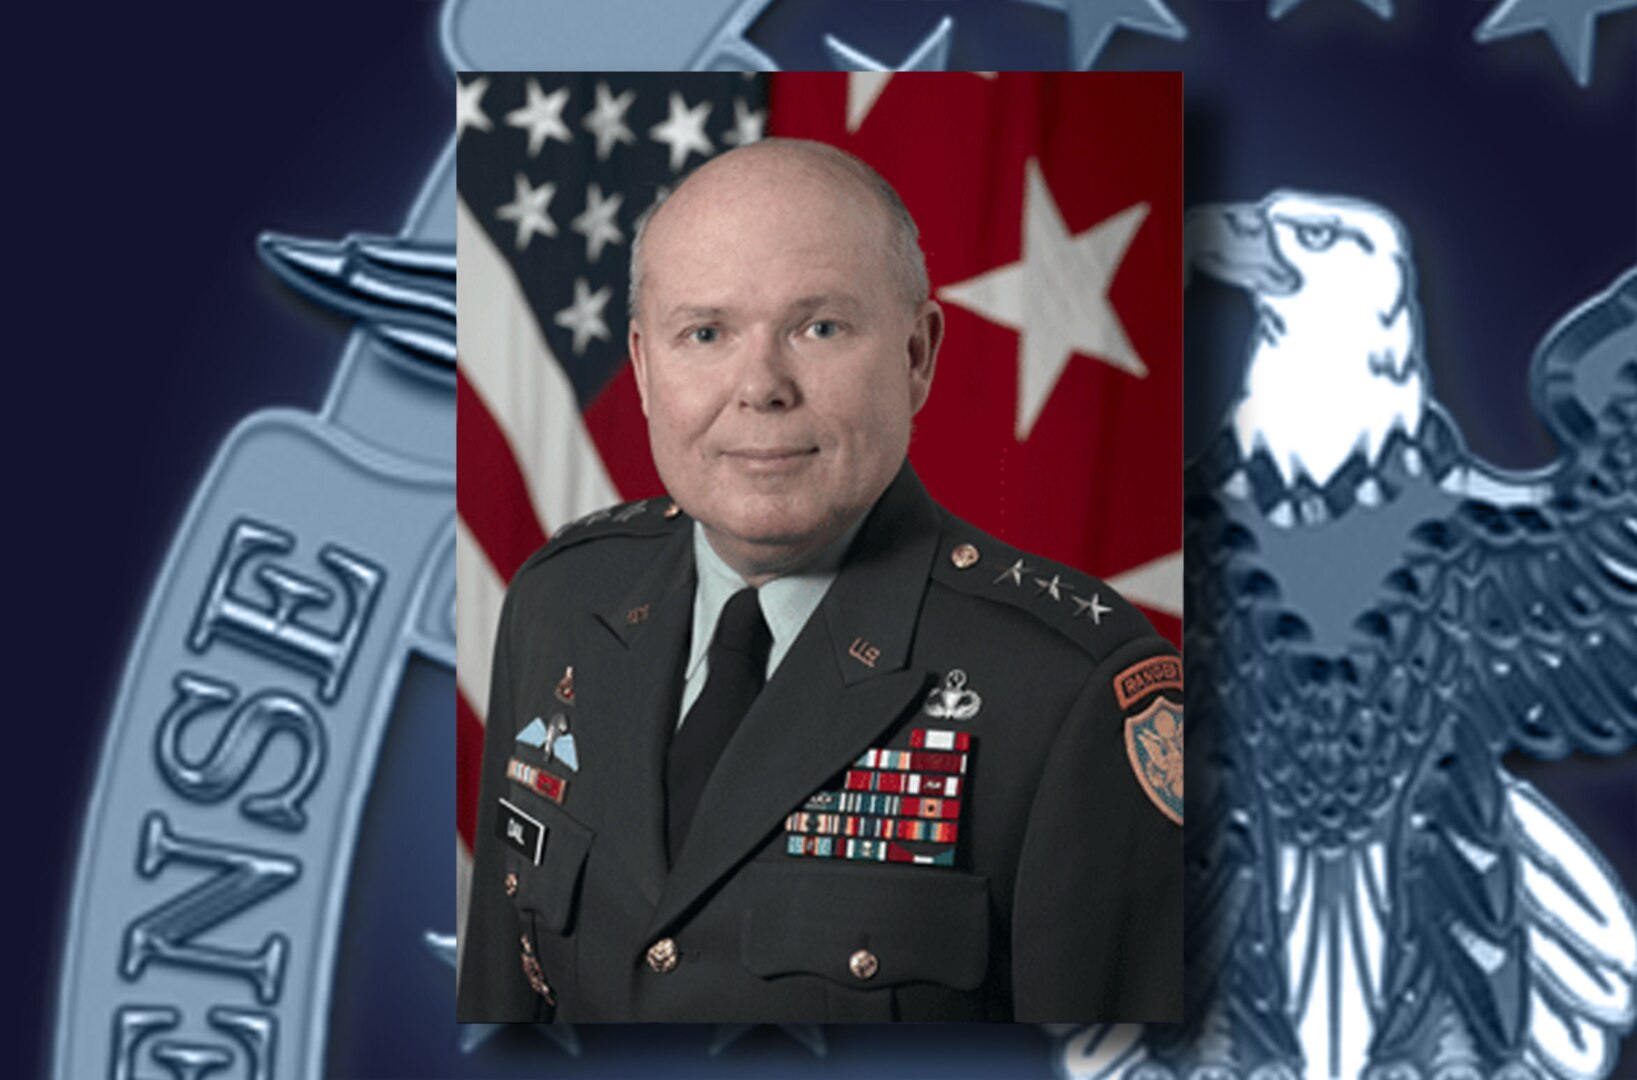 Retired Army Lt. Gen. Robert Dail, former director of DLA, is being inducted into the DLA Hall of Fame July 14 in recognition of his contributions to the agency at a critical time.